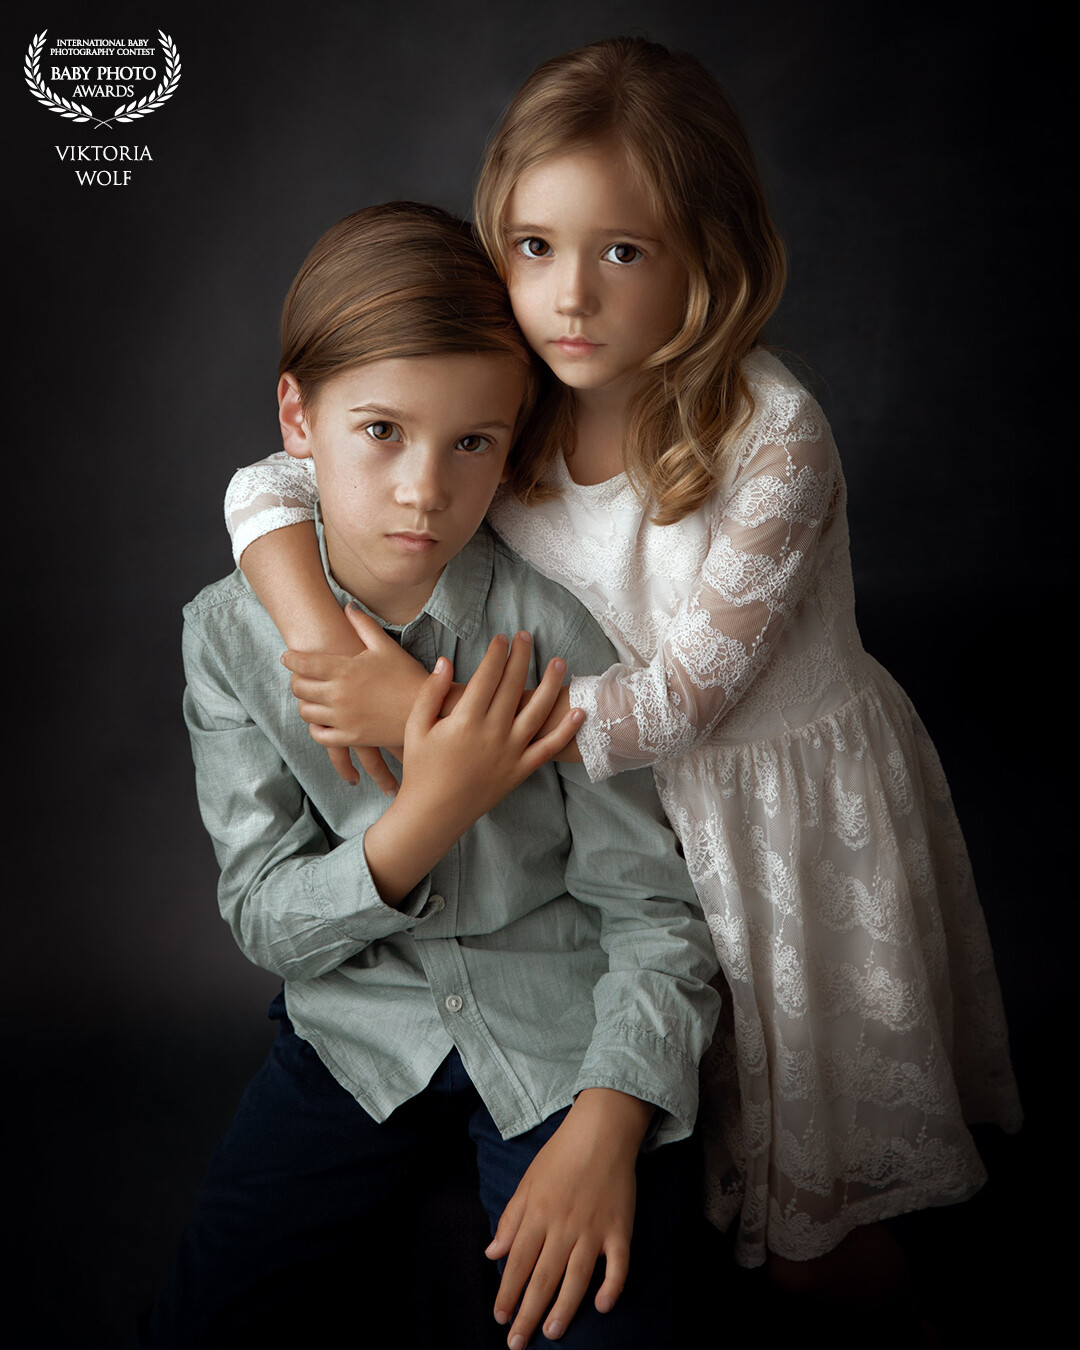 I am happy that my works are included in the new collection :-) These siblings were just great at the shoot.